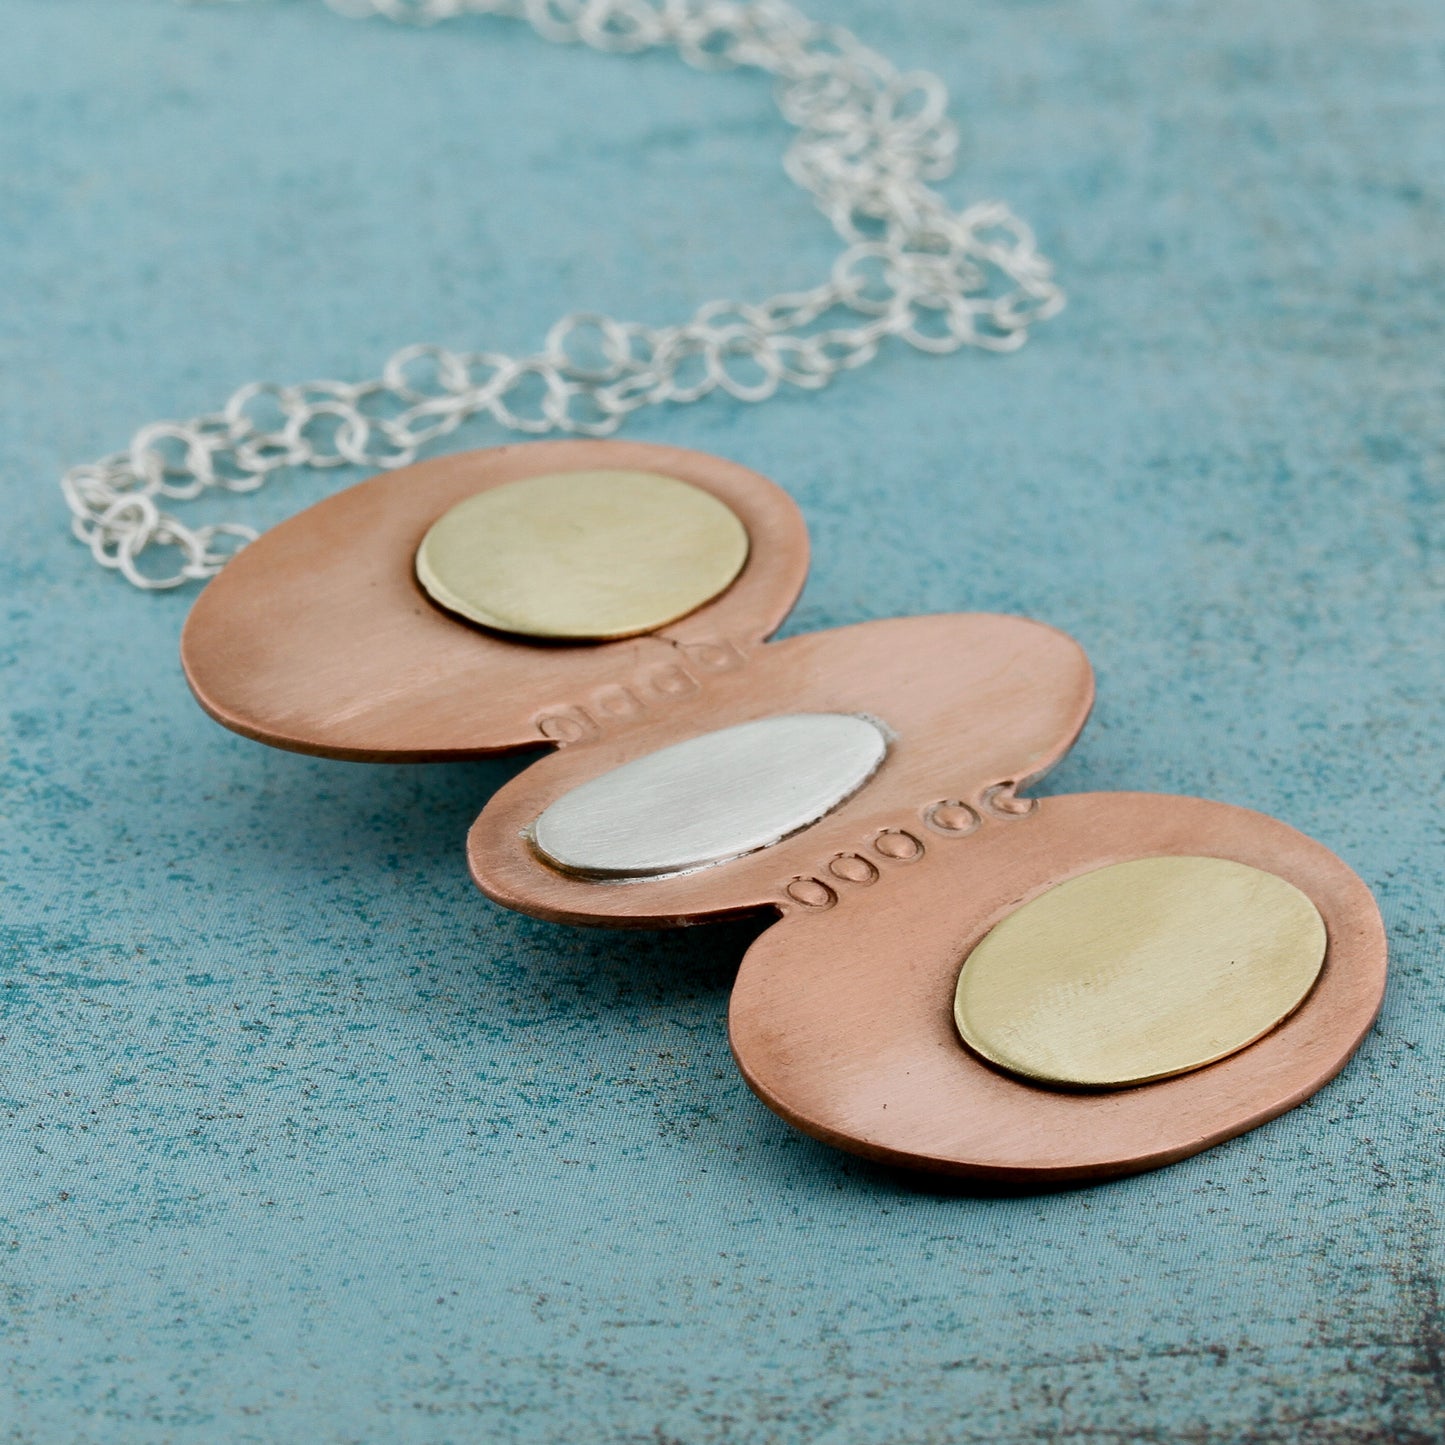 Modernist inspired ovals in copper, brass, and silver.